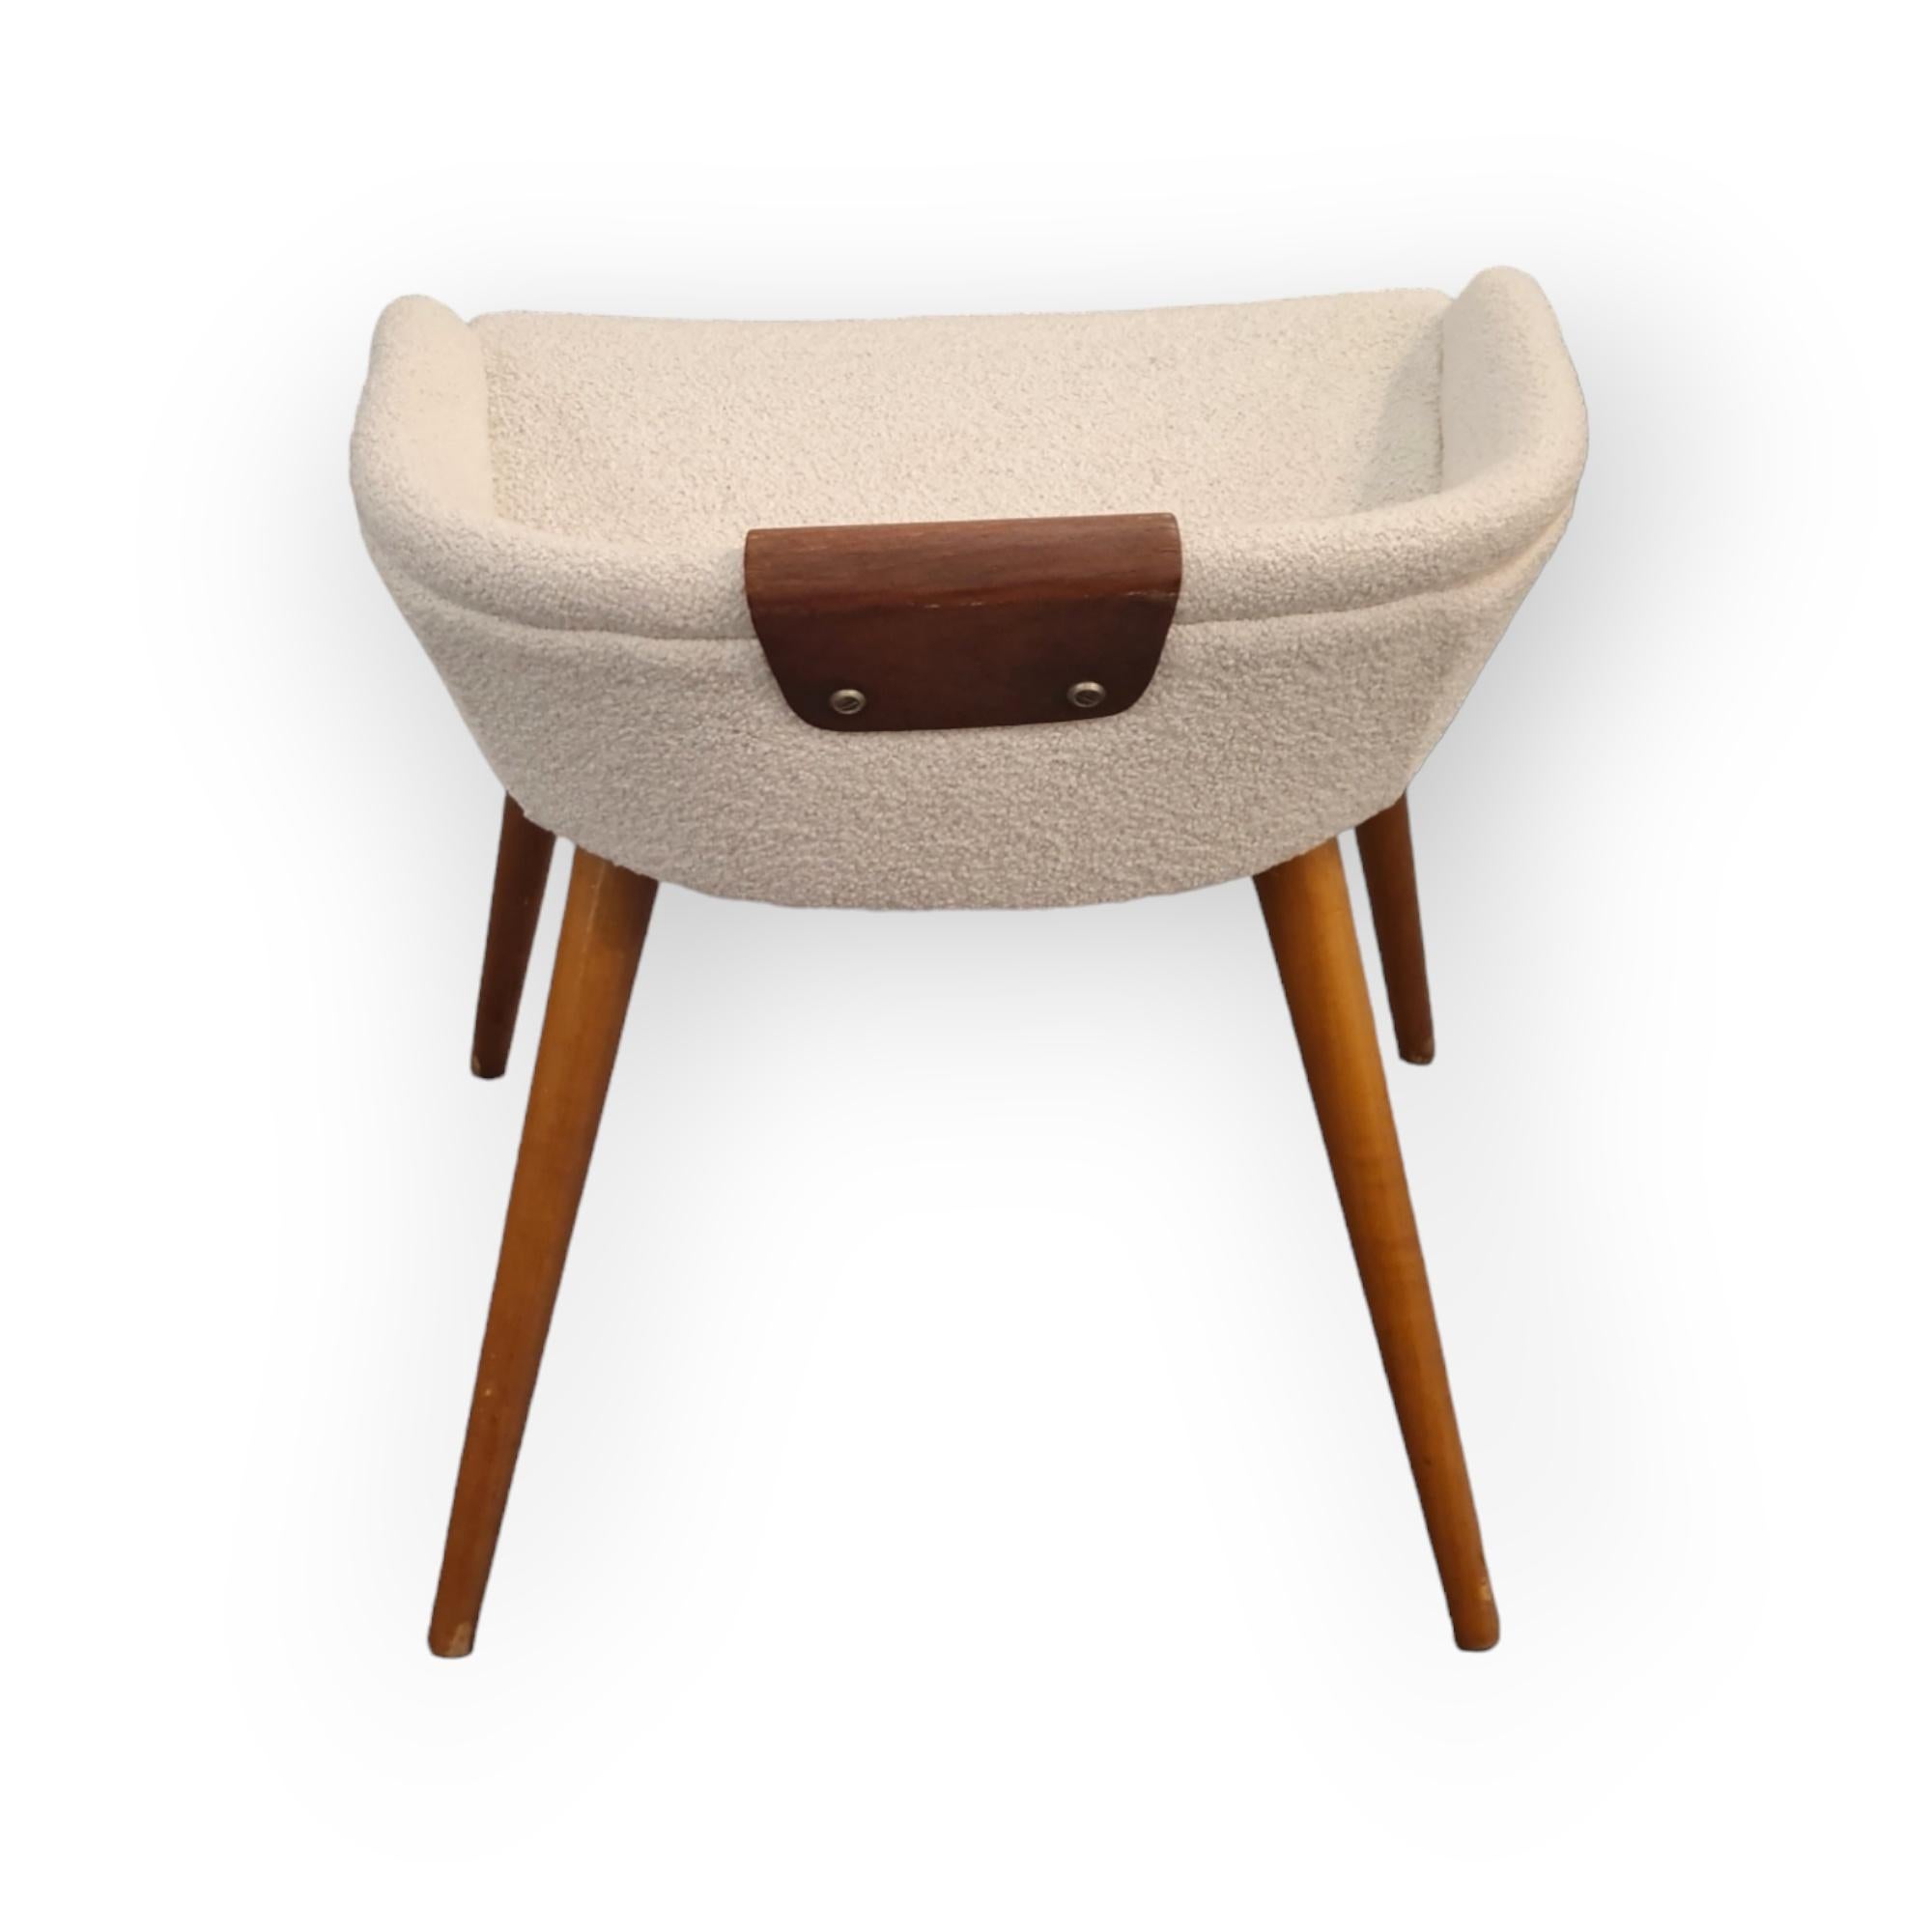 A beautiful vintage vanity stool designed by Finnish designer Kurt Hvitsjö and made by Lahden Puukalusto Oy which later became known as Isku, one of the main competitors of Asko and situated also in Lahti city. 
The chair is part of a vanity set,